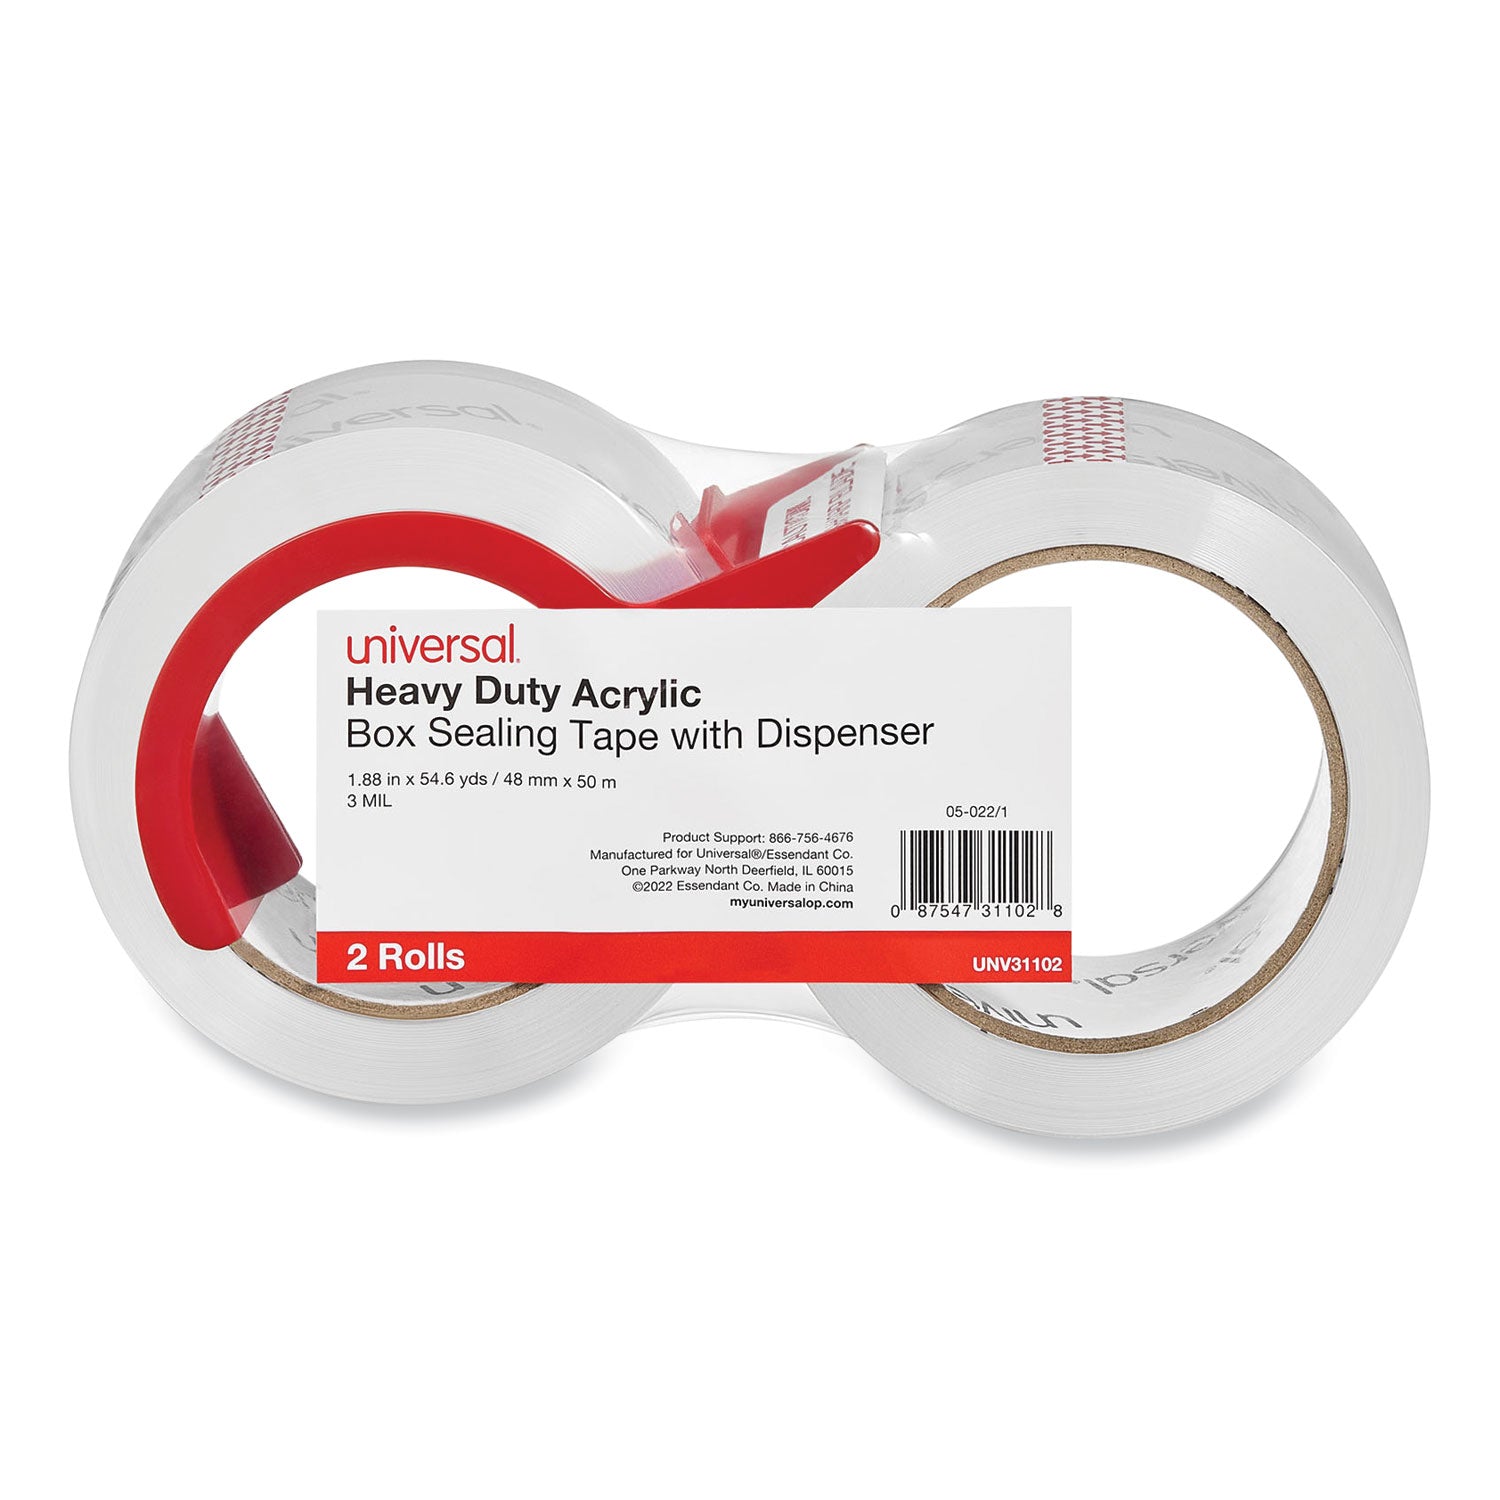 Heavy-Duty Acrylic Box Sealing Tape with Dispenser, 3" Core, 1.88" x 54.6 yds, Clear, 2/Pack - 